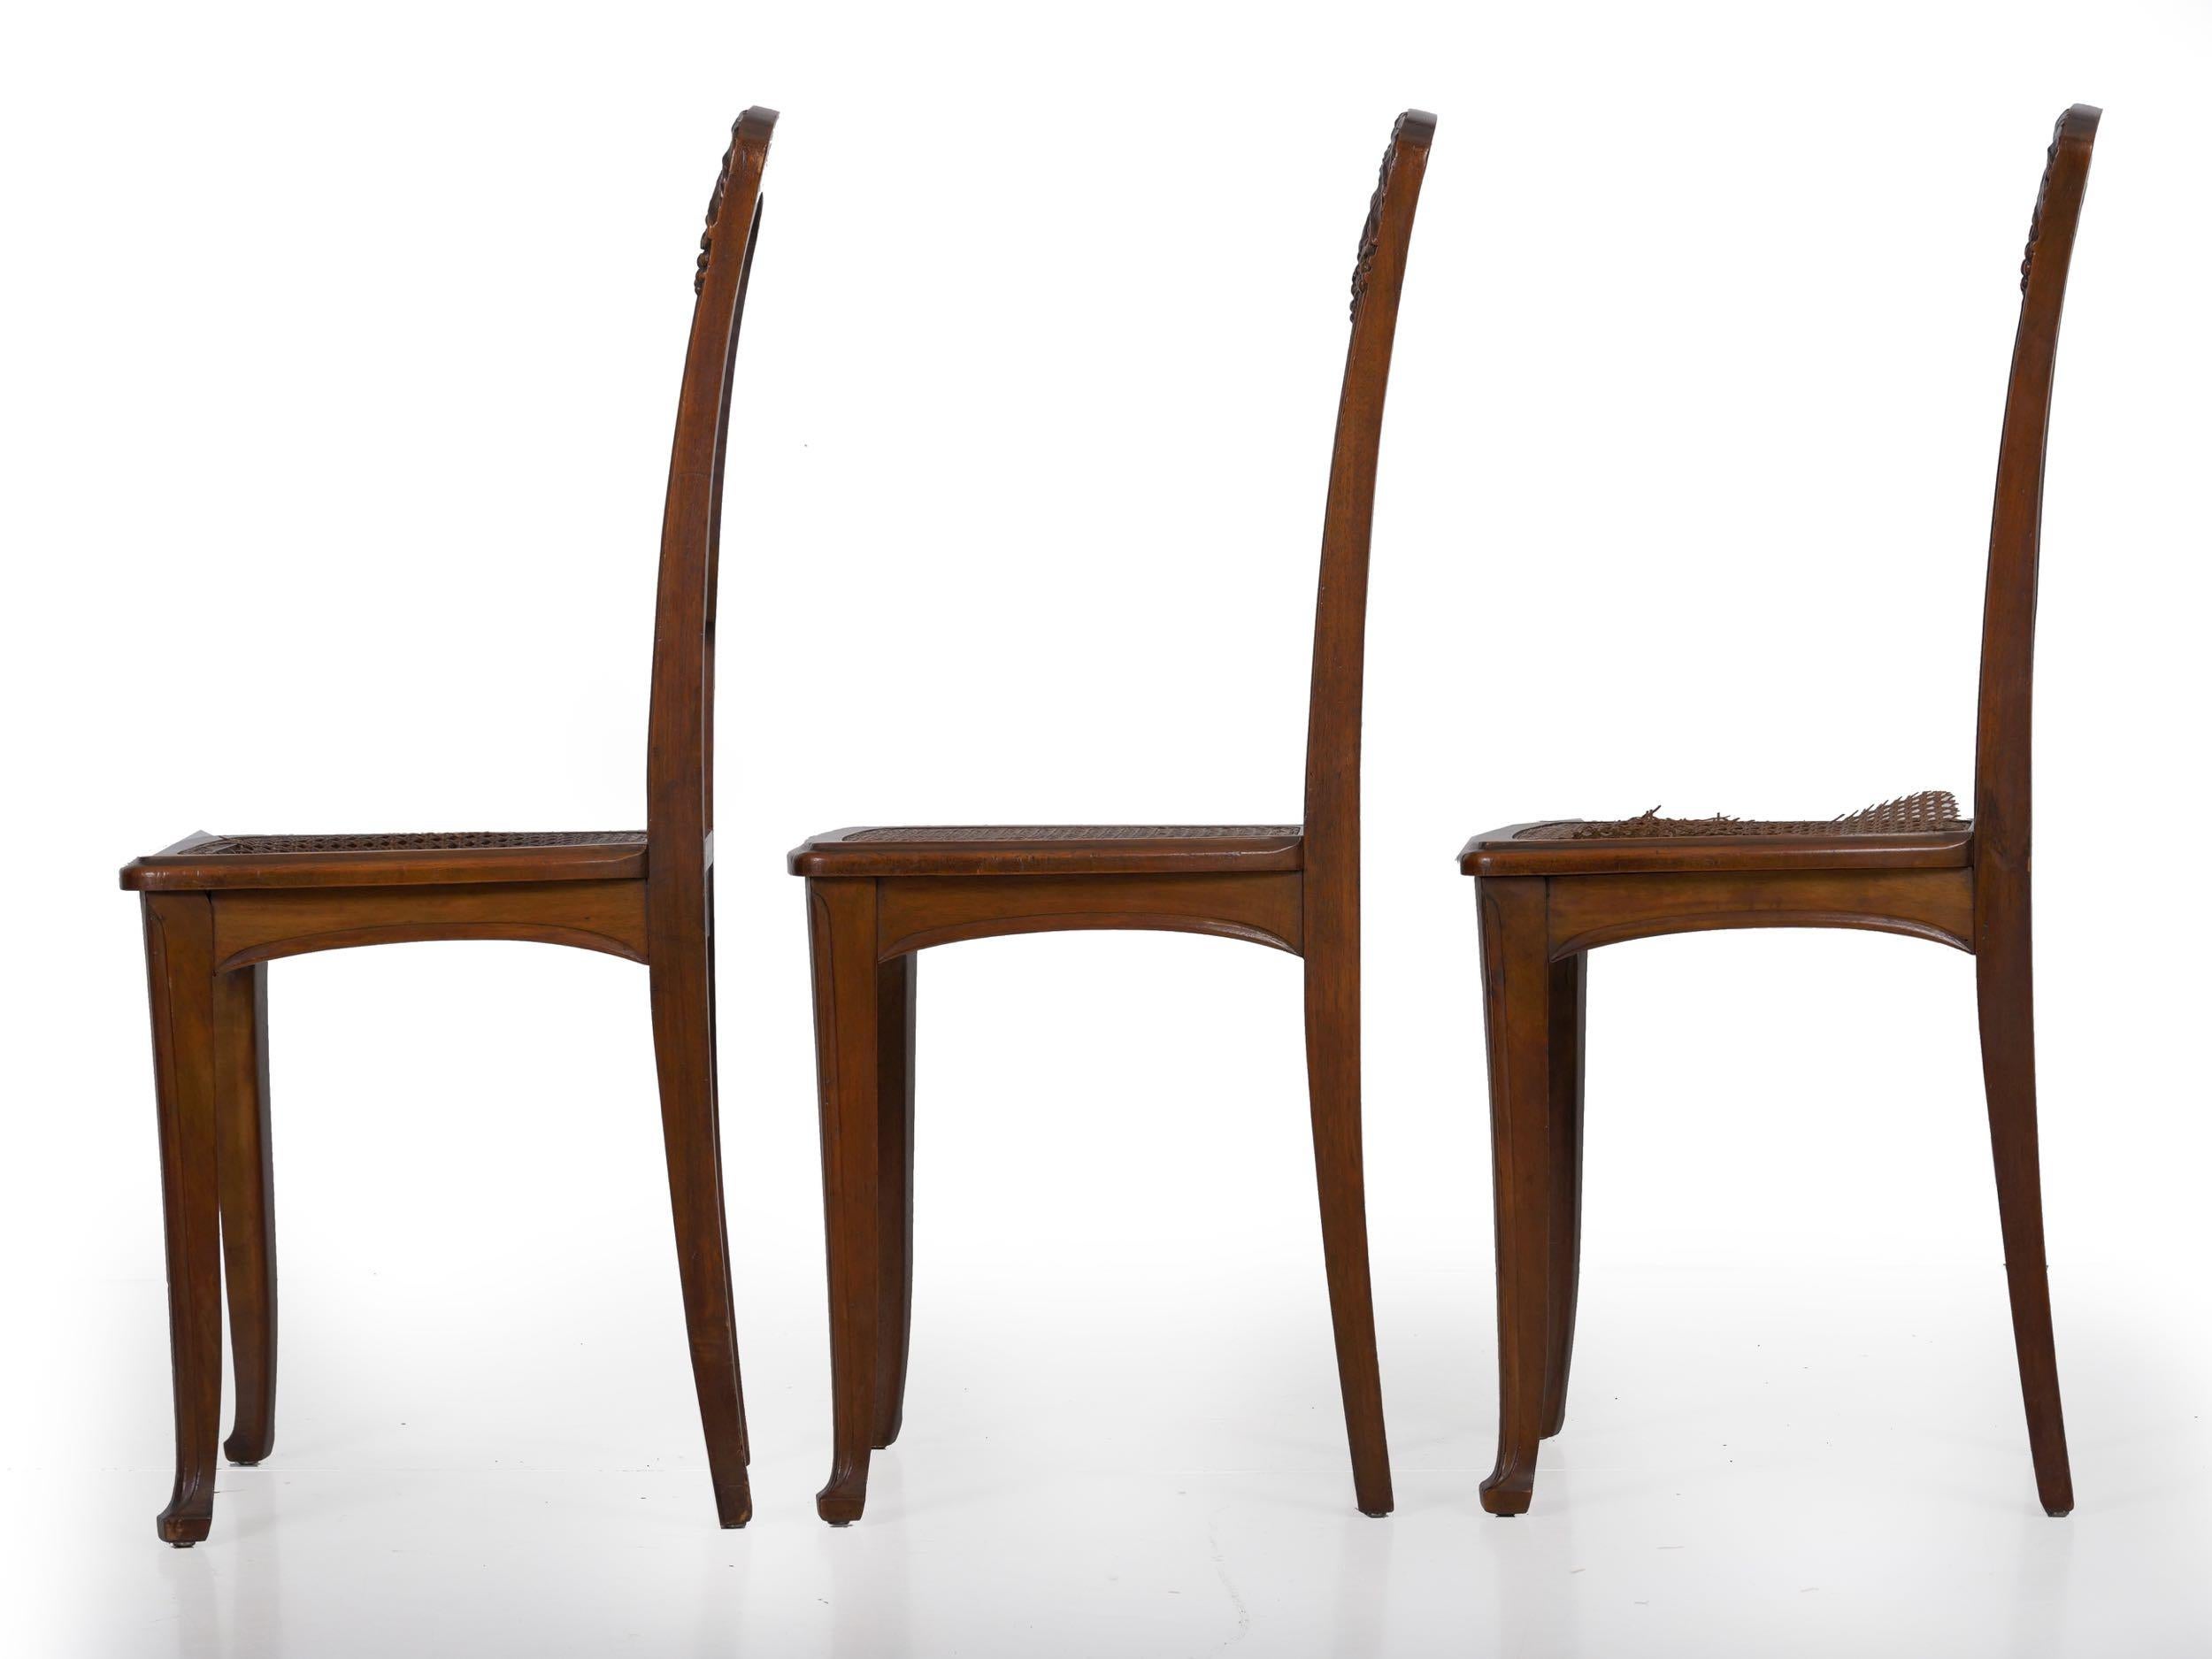 20th Century Finely Carved Walnut Set of Six French Art Nouveau Dining Chairs